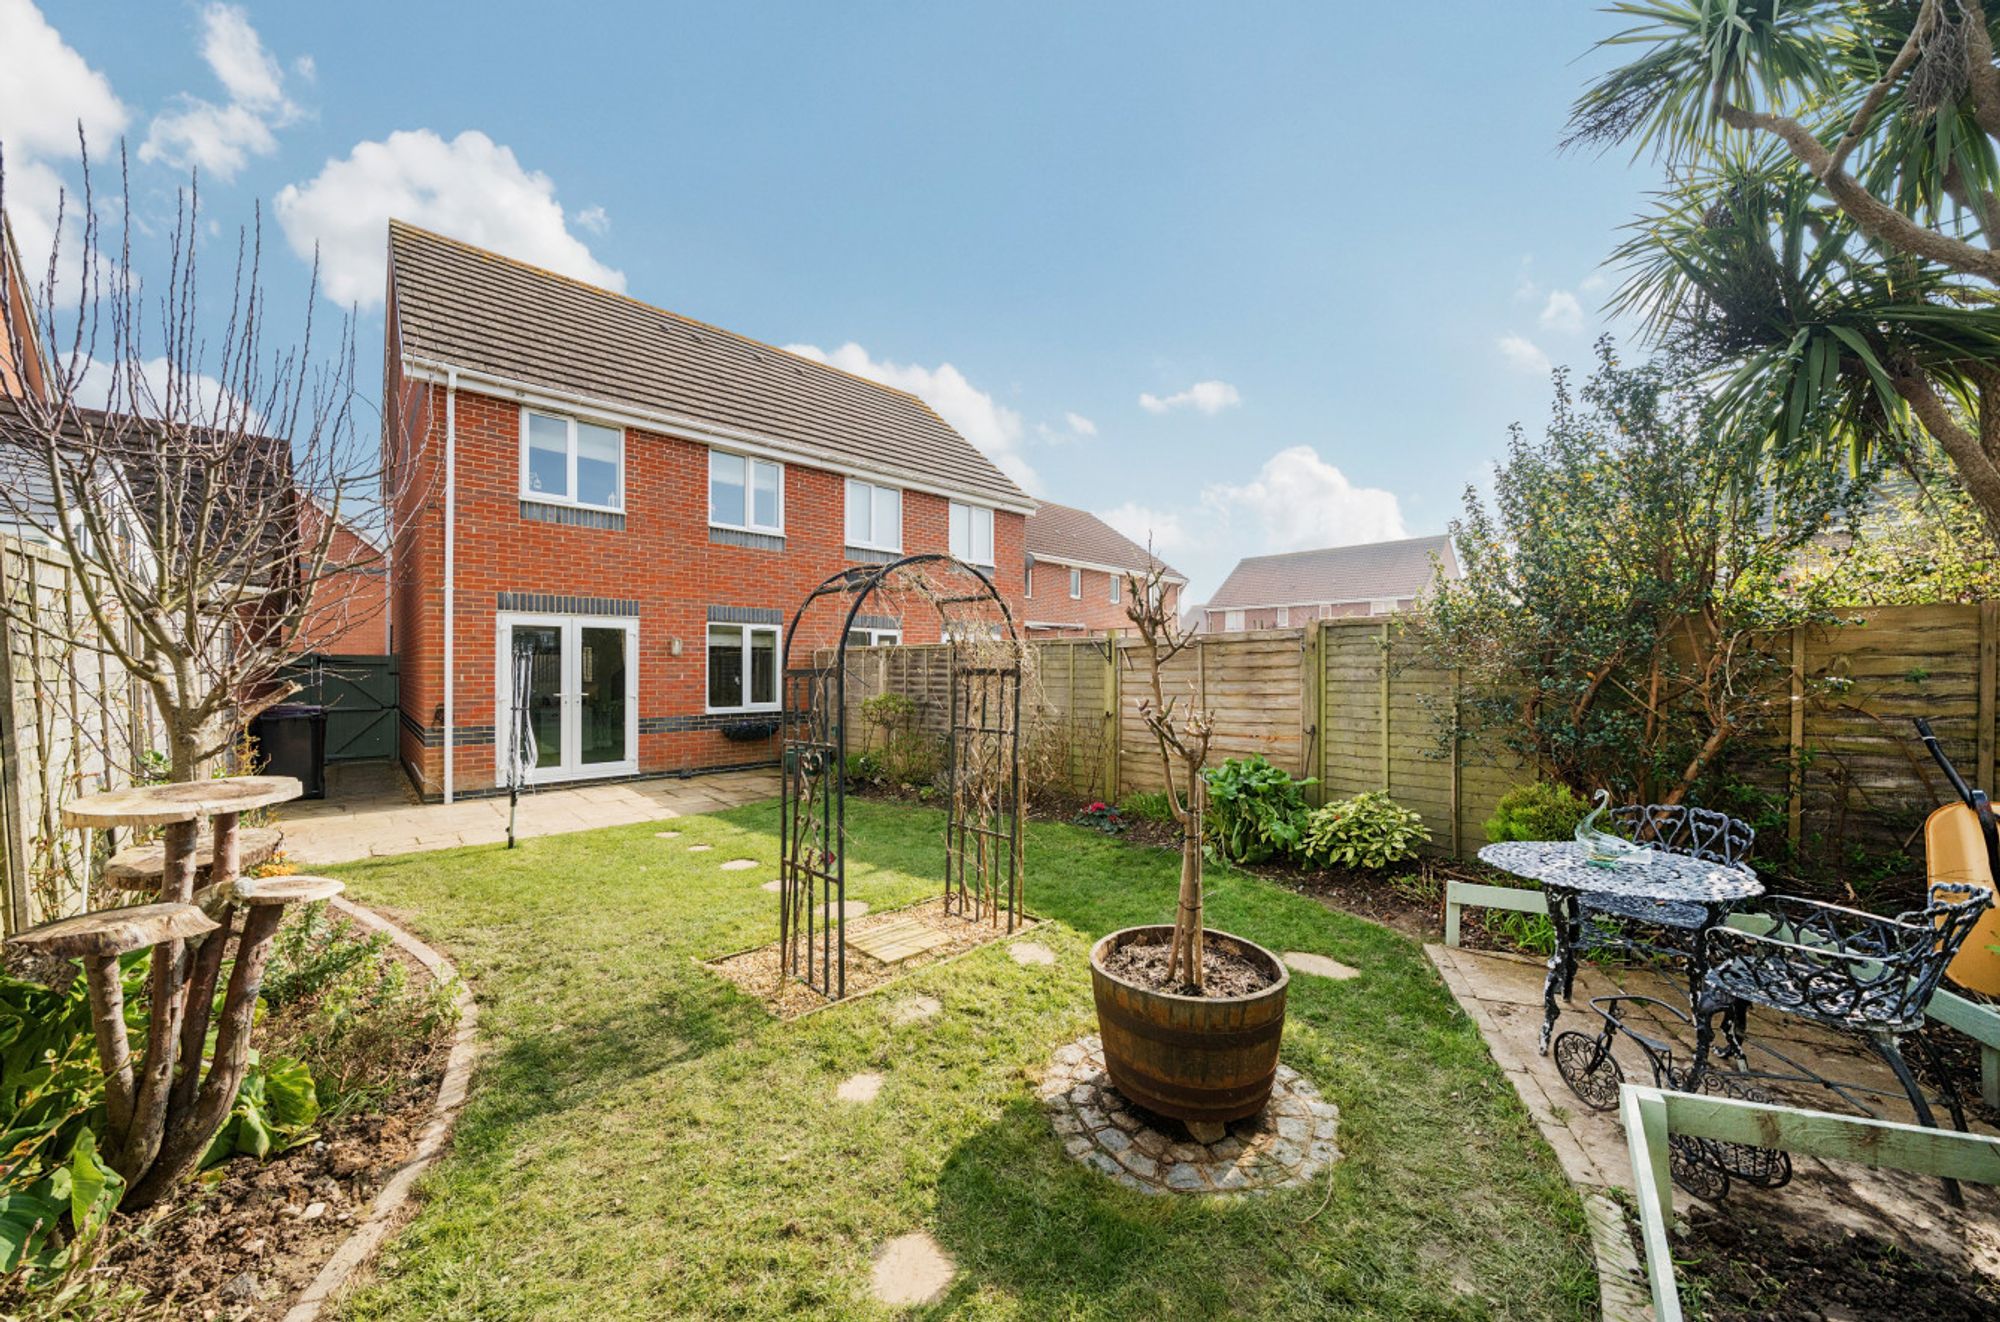 Domehouse Close, Selsey, PO20